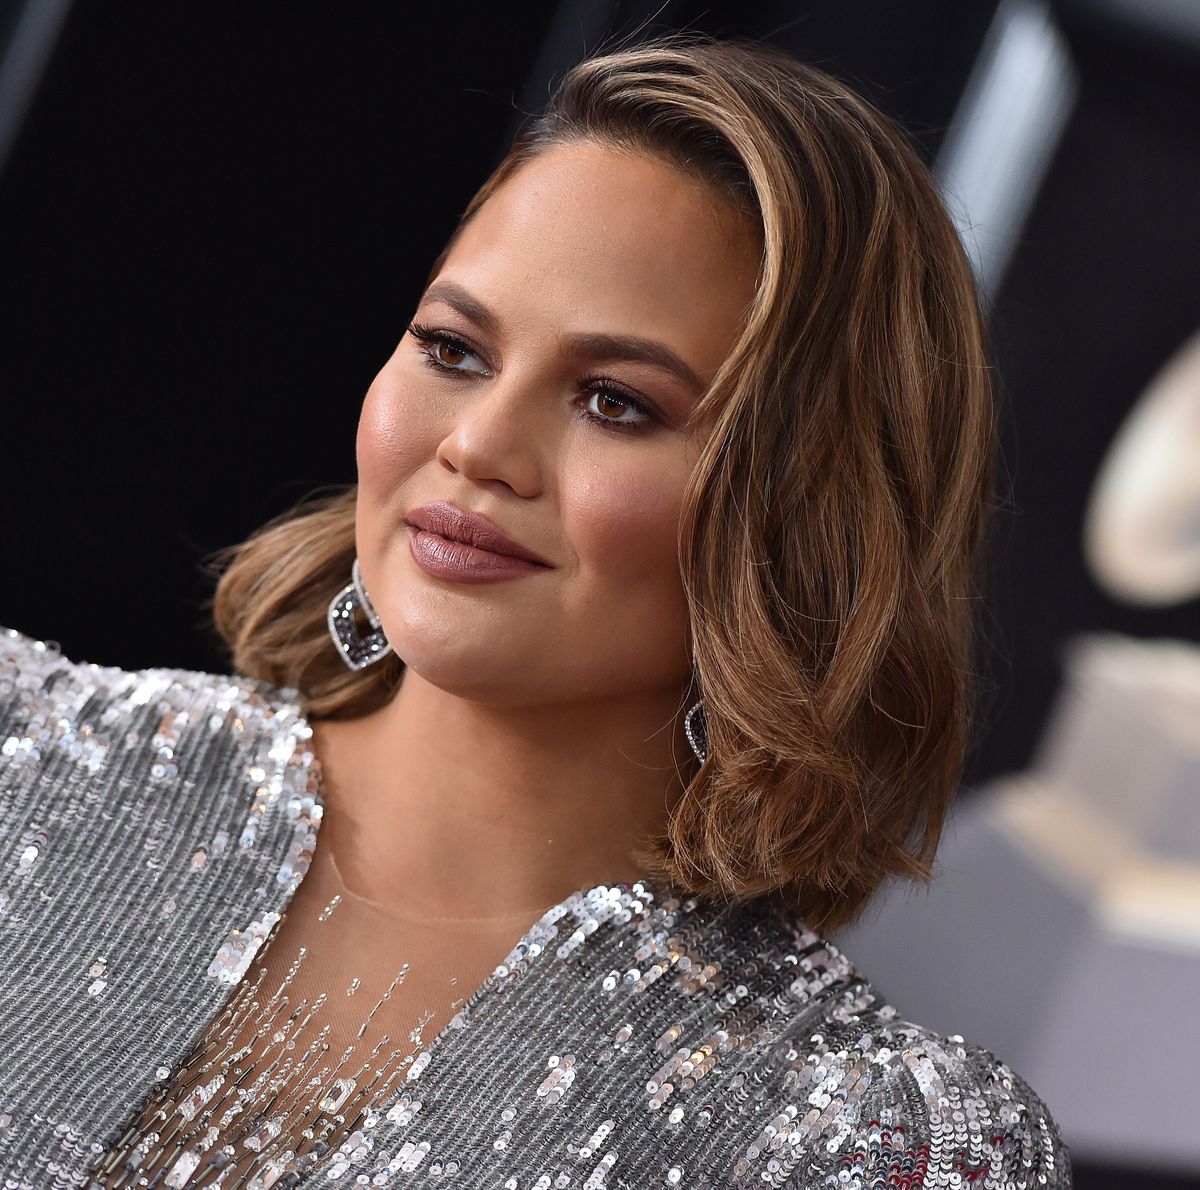 new york, ny   january 28  model chrissy teigen attends the 60th annual grammy awards at madison square garden on january 28, 2018 in new york city  photo by axellebauer griffinfilmmagic